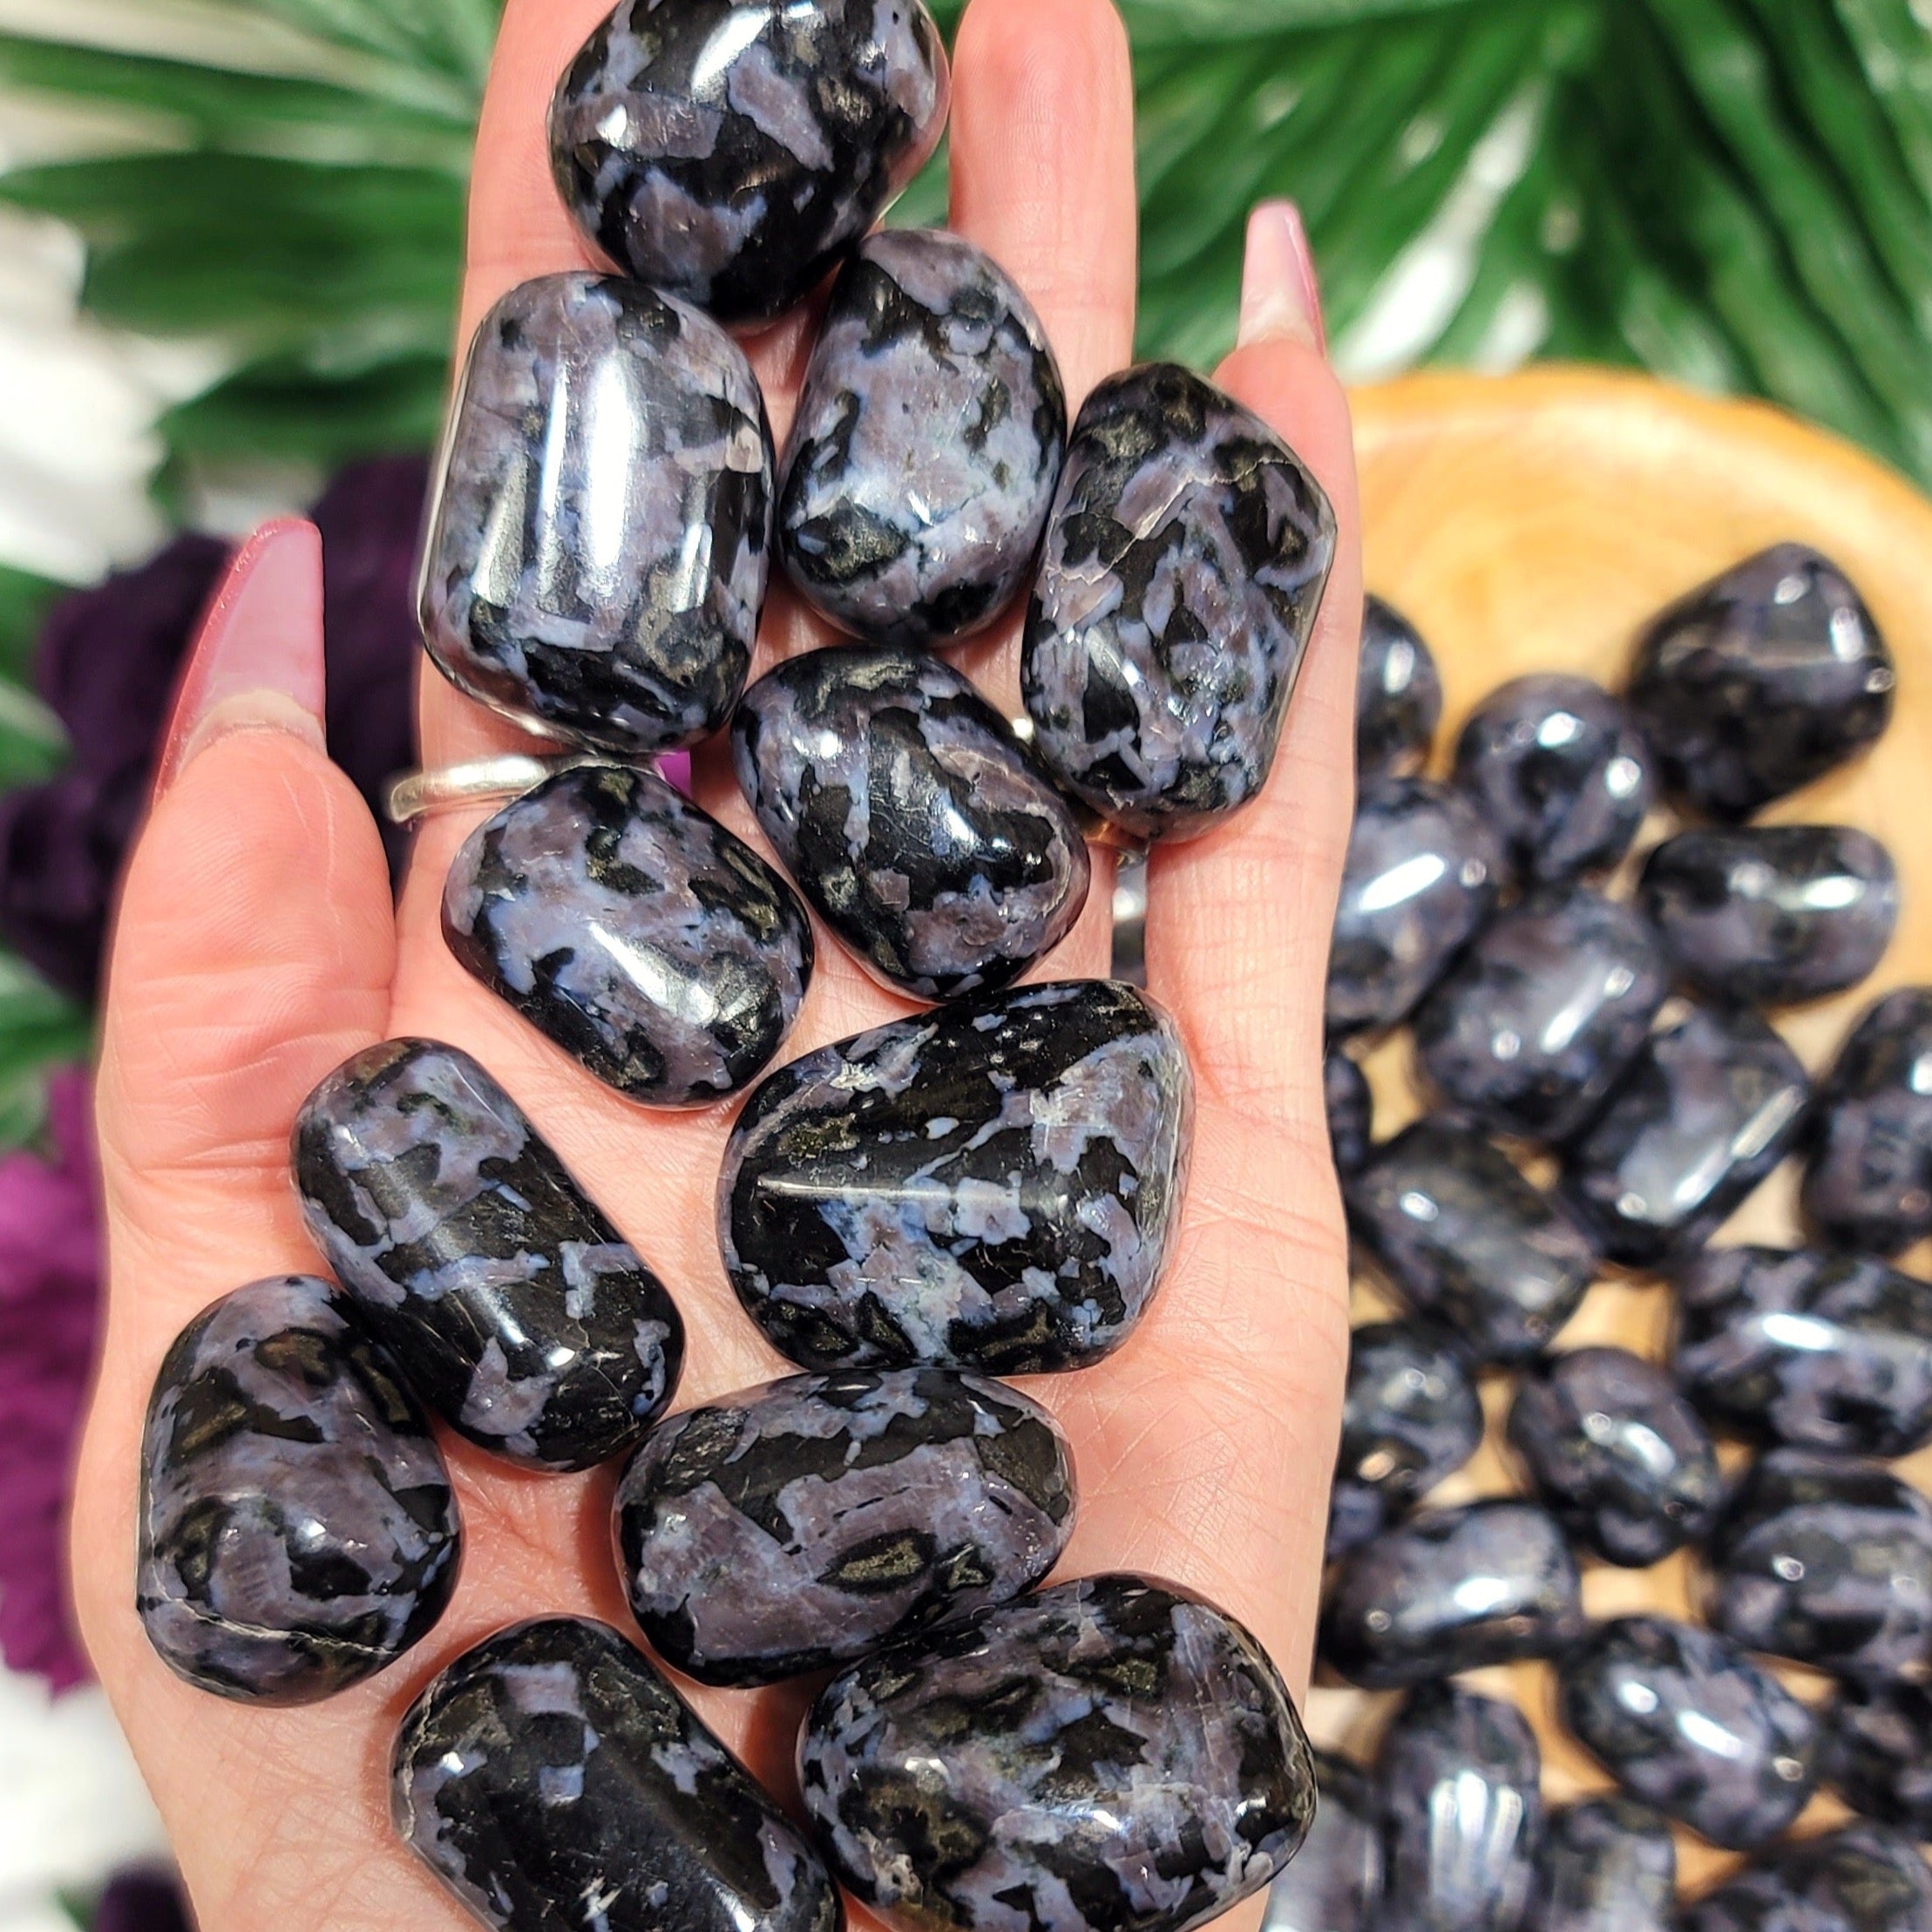 Indigo Gabbro Tumble for Enhanced Intuition and Embracing Your Inner Magic